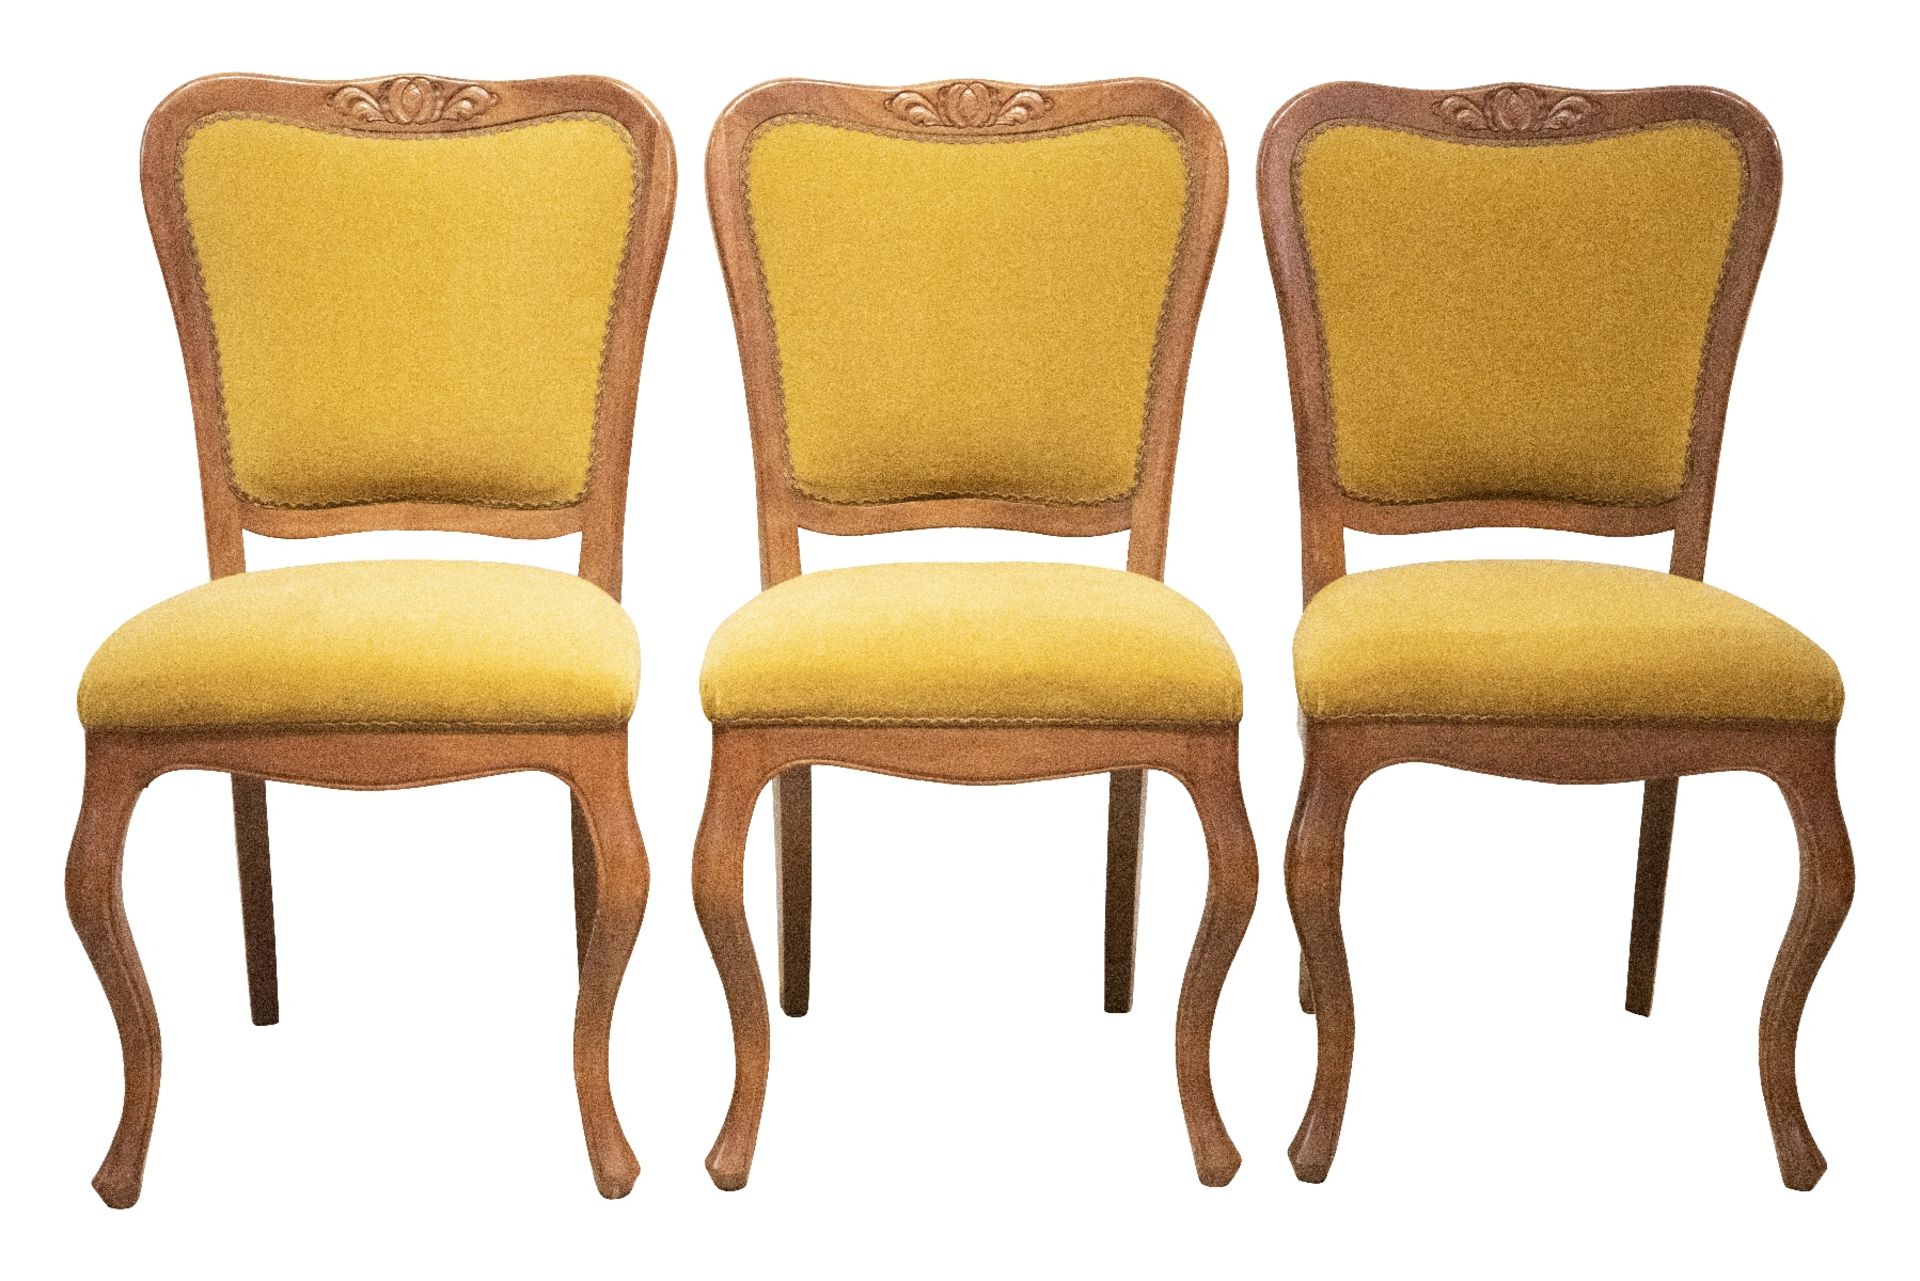 3 Esszimmersessel | 3 Dining Room Armchairs